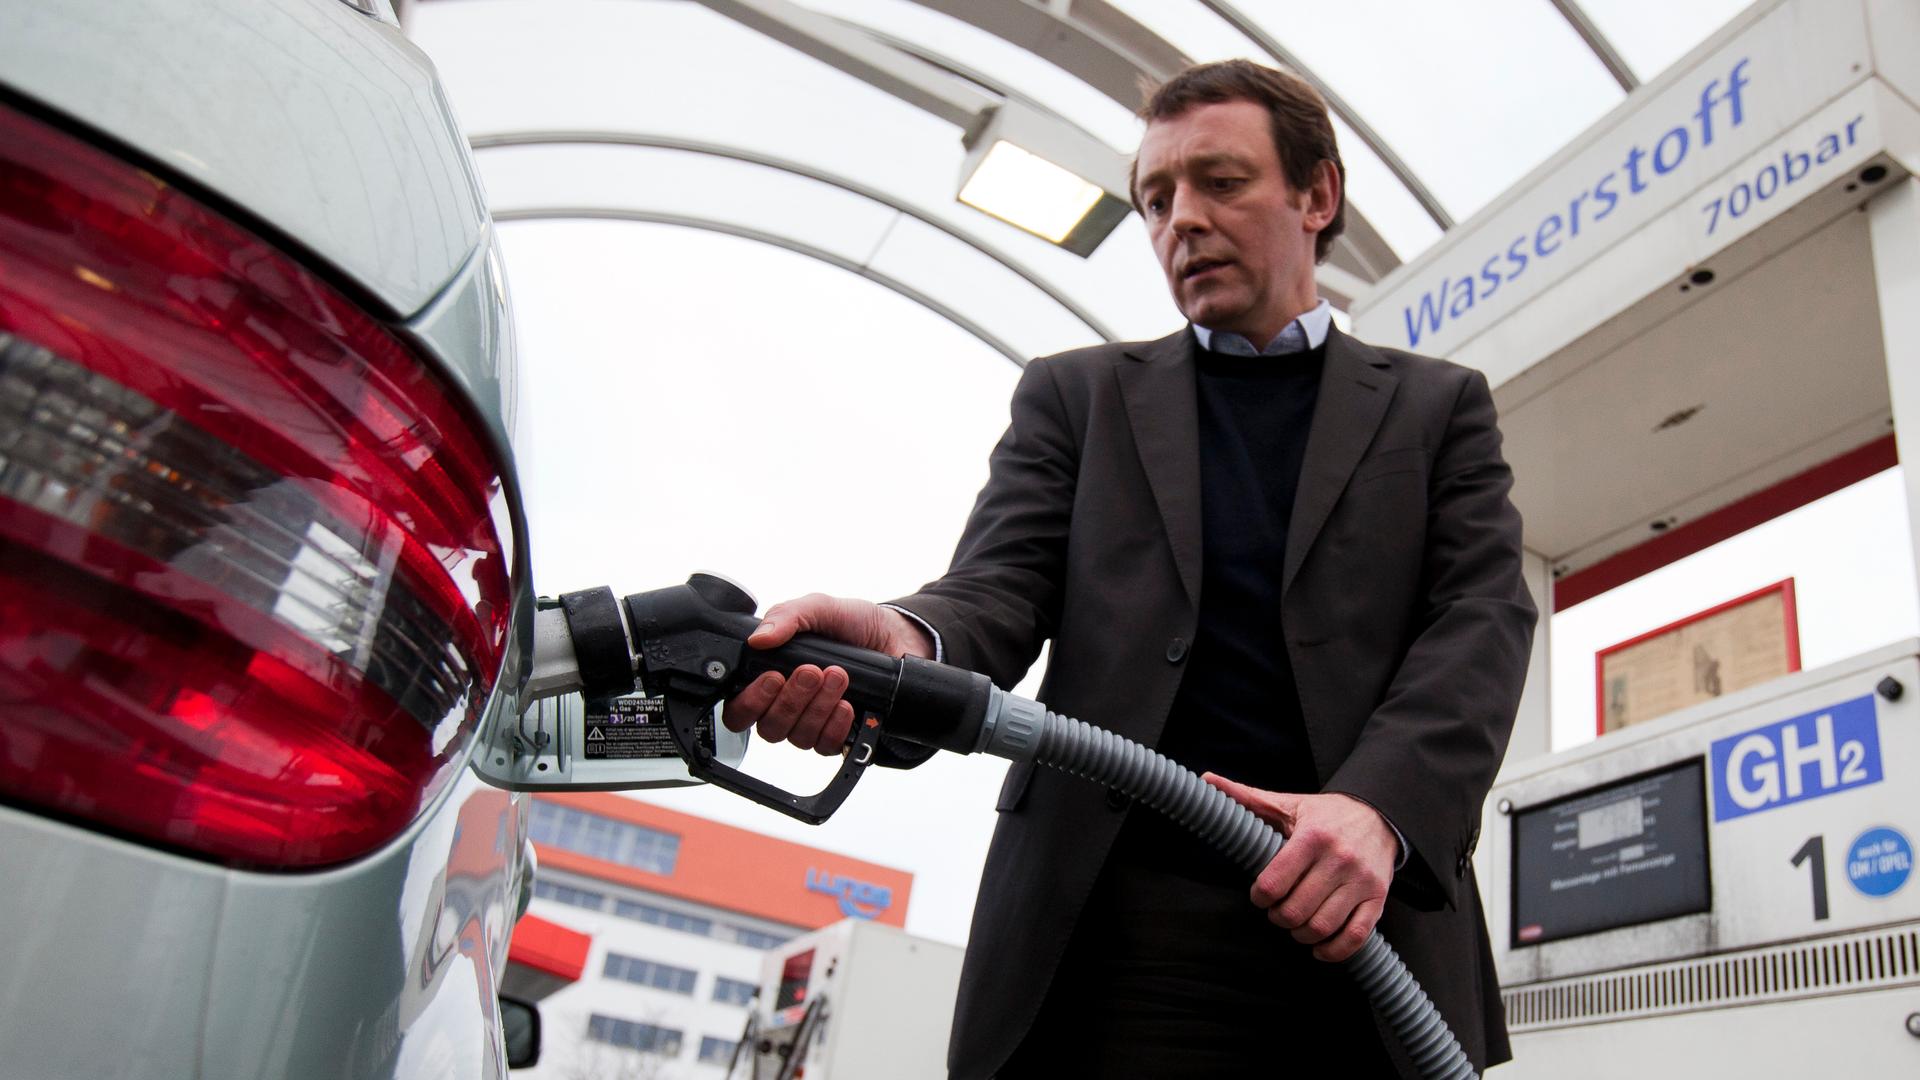 Lutz Wiese of Vattenfall power company refuels a hydrogen-powered Mercedes at a filling station in Berlin. Vatenfall is a partner in the world's first direct wind-hydrogen power plant, in northern Germany. Using wind-generated electricity to create hydrog